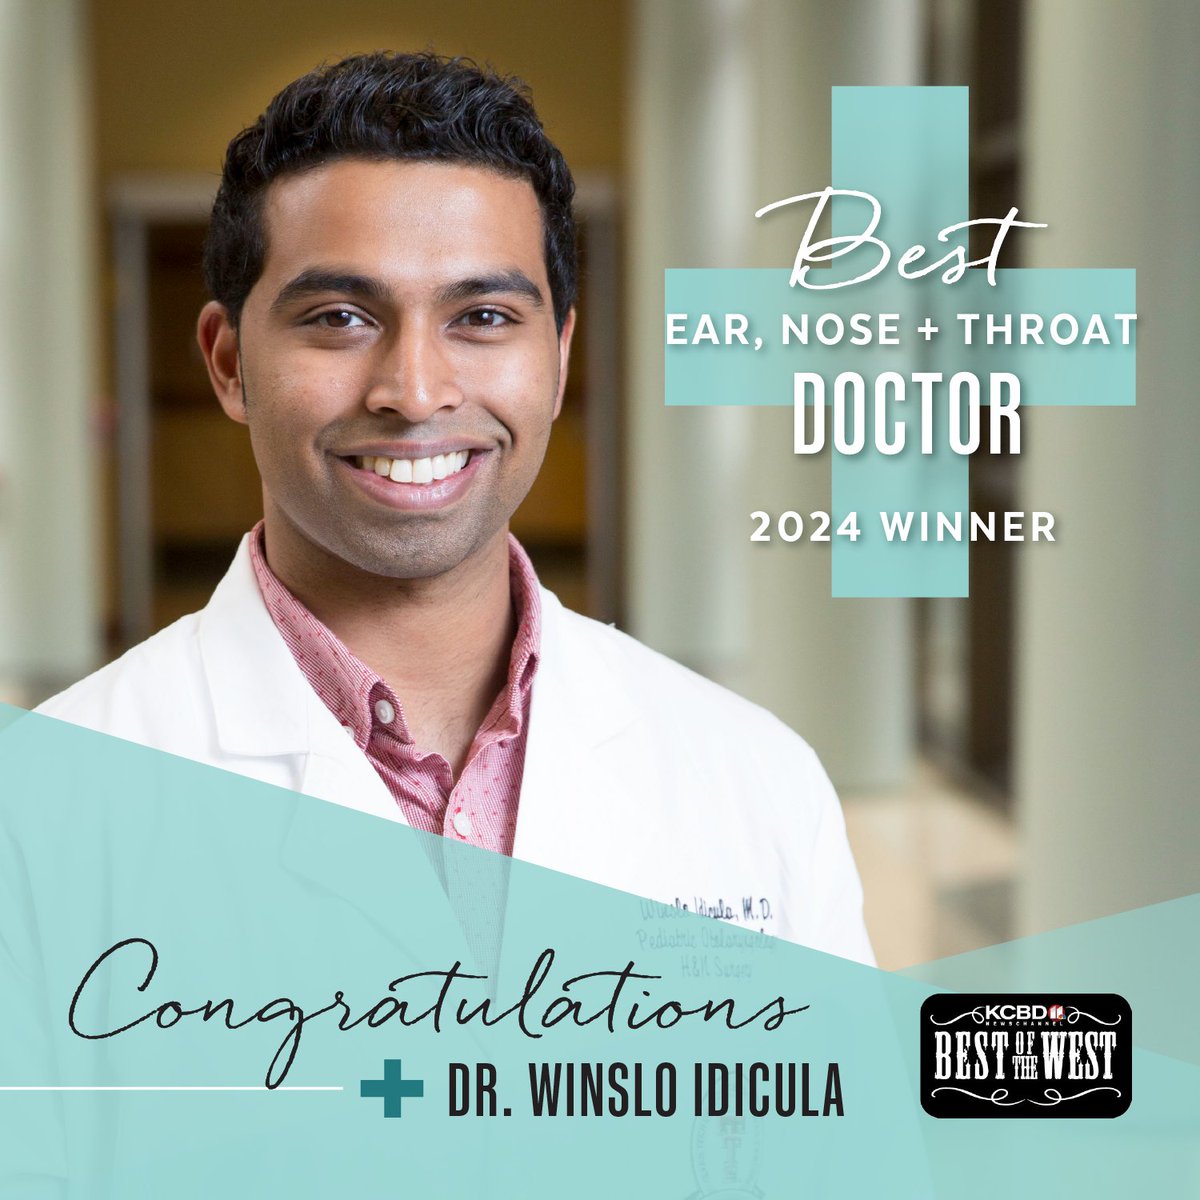 Congratulations to Winslo Idicula, M.D., a @ttphysicians Ear, Nose + Throat (ENT) doctor, on winning @KCBD11's 2024 'Best of the West' for Best ENT Doctor! 👏 Dr. Idicula is trained specifically to treat children who suffer from hearing loss or other hearing and speech disorders.